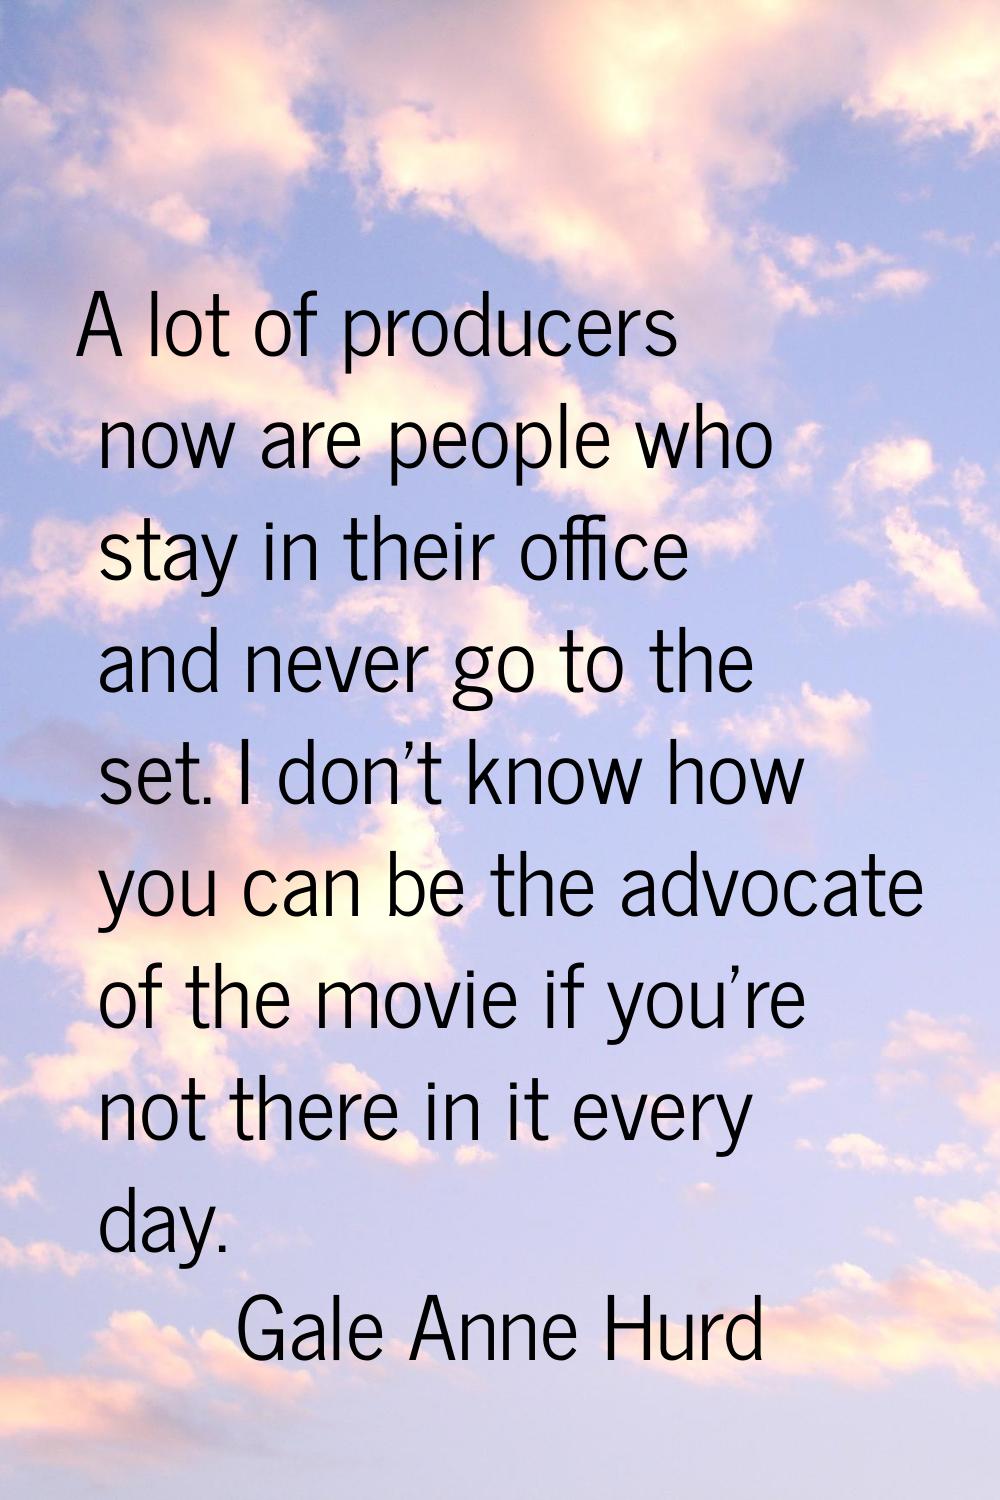 A lot of producers now are people who stay in their office and never go to the set. I don't know ho